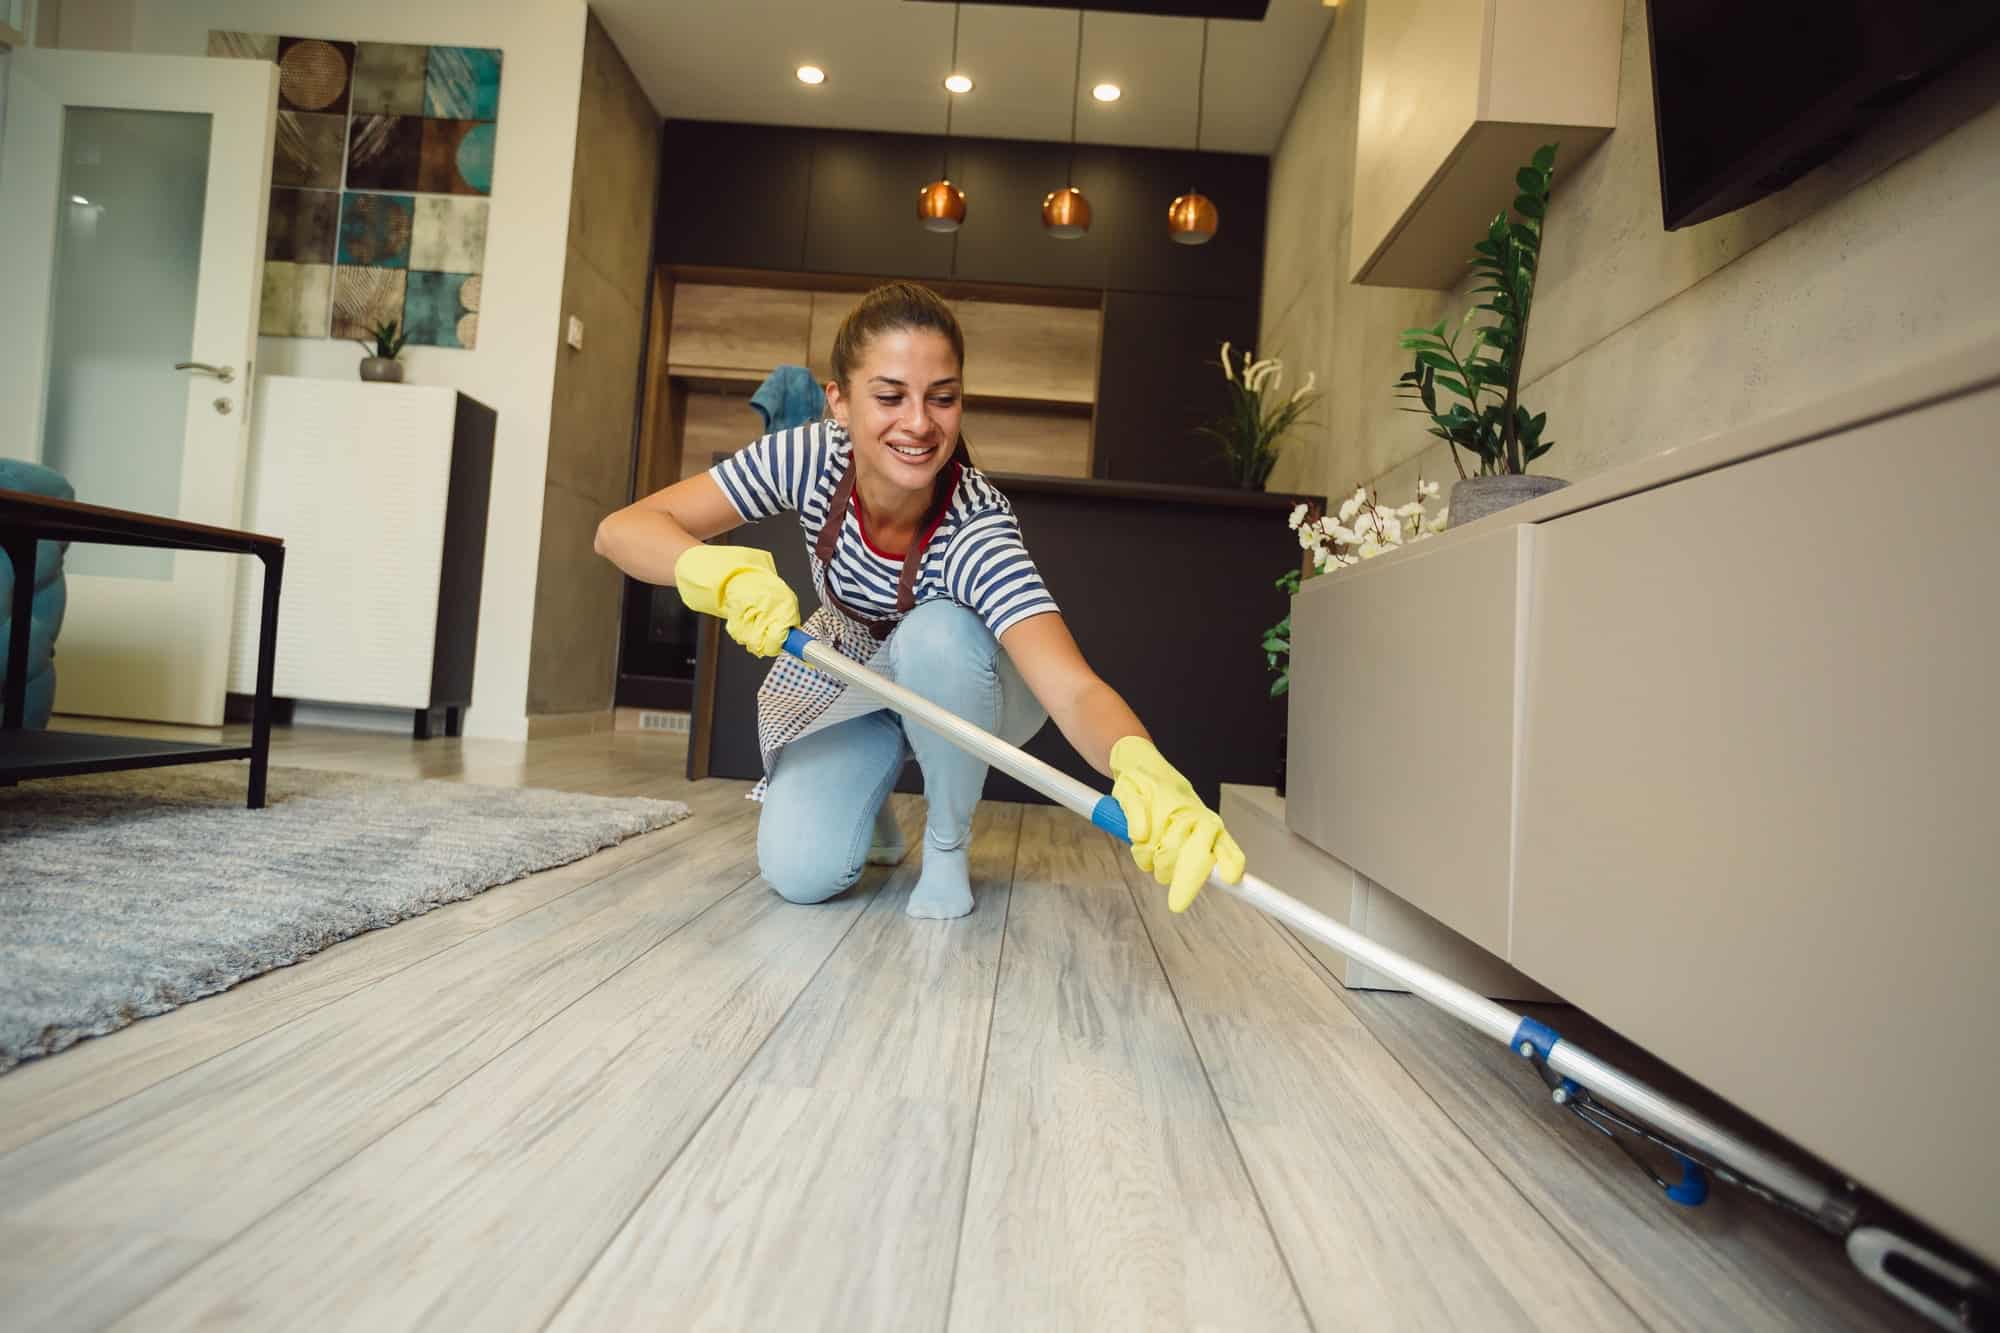 beautiful-young-woman-is-smiling-and-cleaning-floor-under-furniture-at-home-using-a-mop.jpg